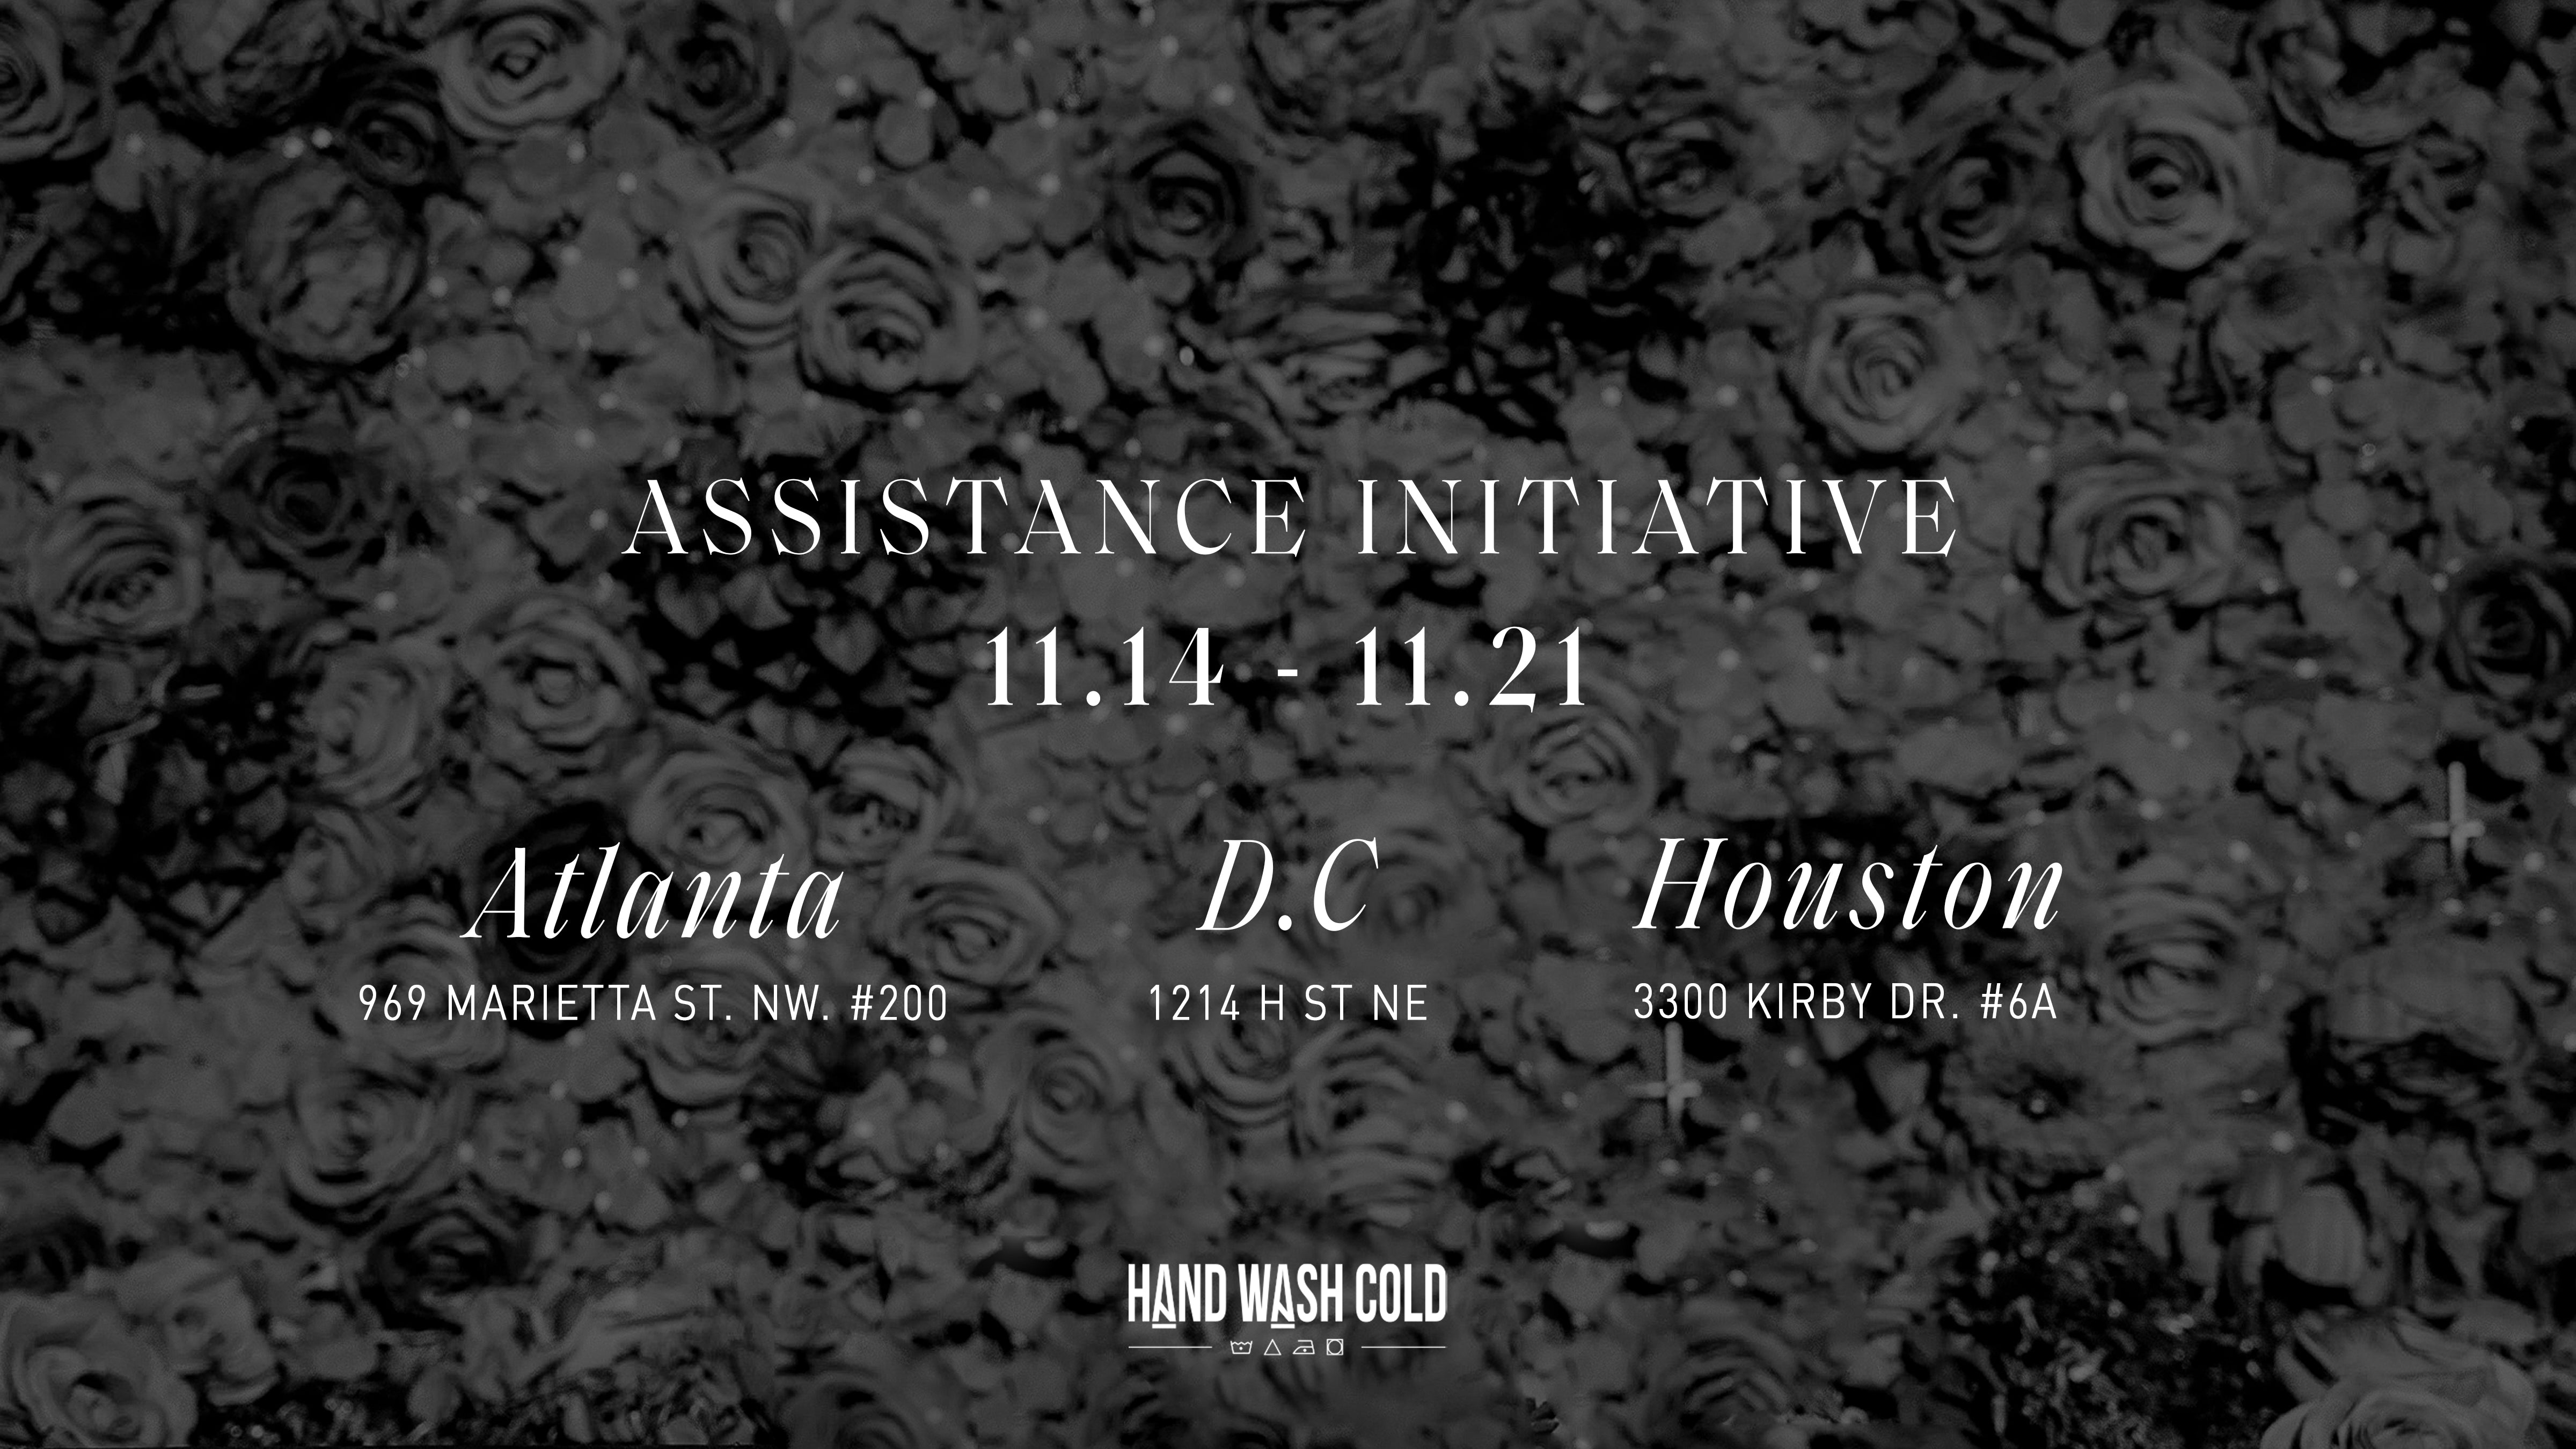 The Hand Wash Cold Assistance Initiative